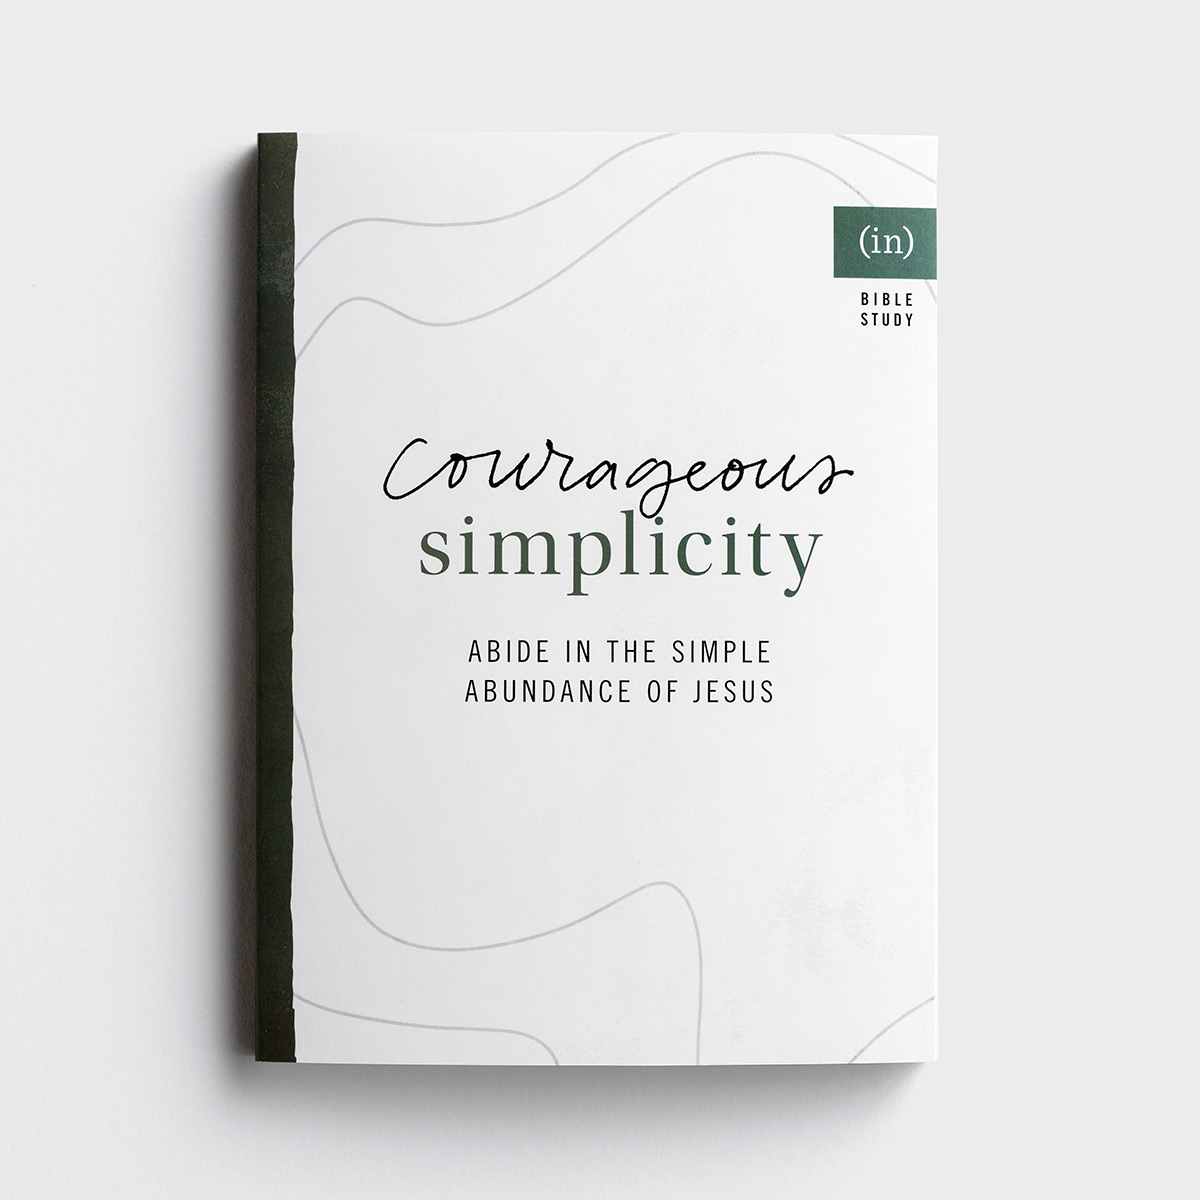 (in)courage - Courageous Simplicity: Abide in the Simple Abundance of Jesus - Bible Study